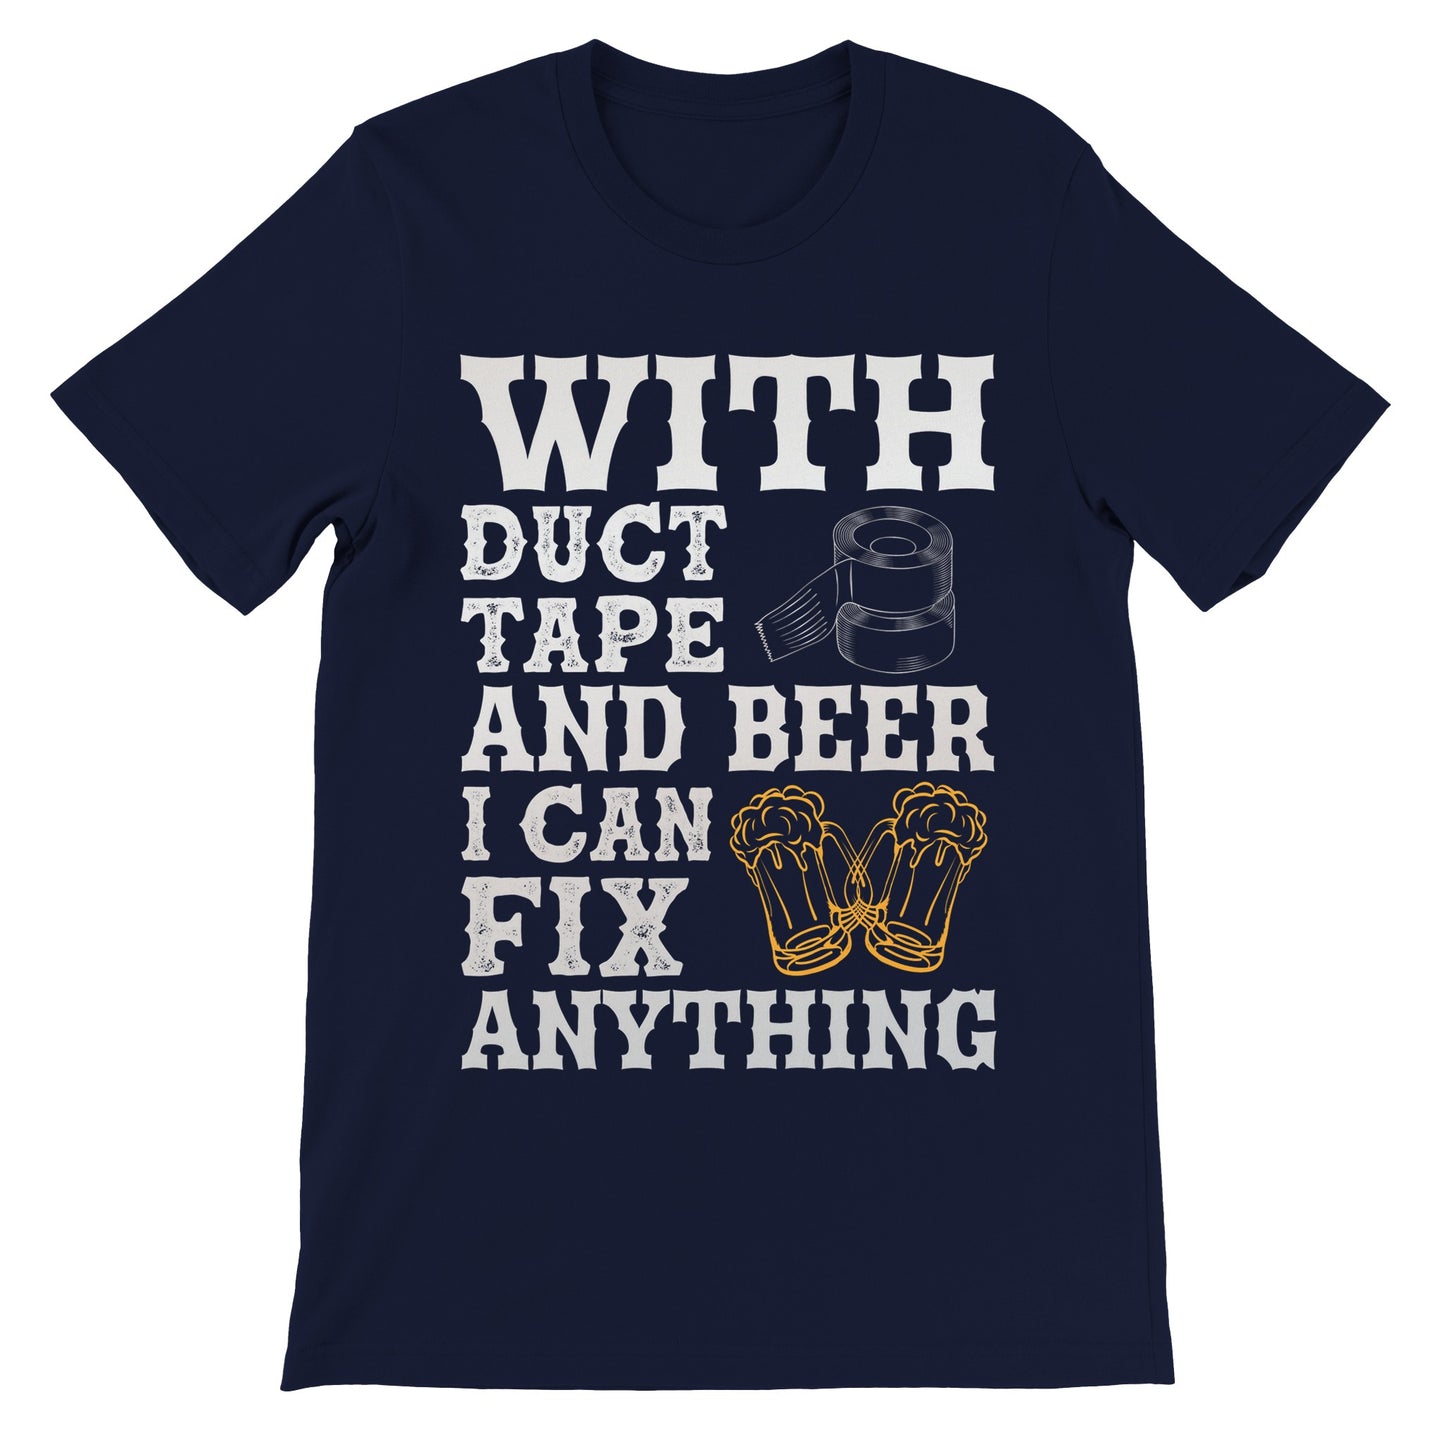 Funny T-shirts - With Duct Tape And Beet I Can Fix Anything - Premium Unisex T-shirt 